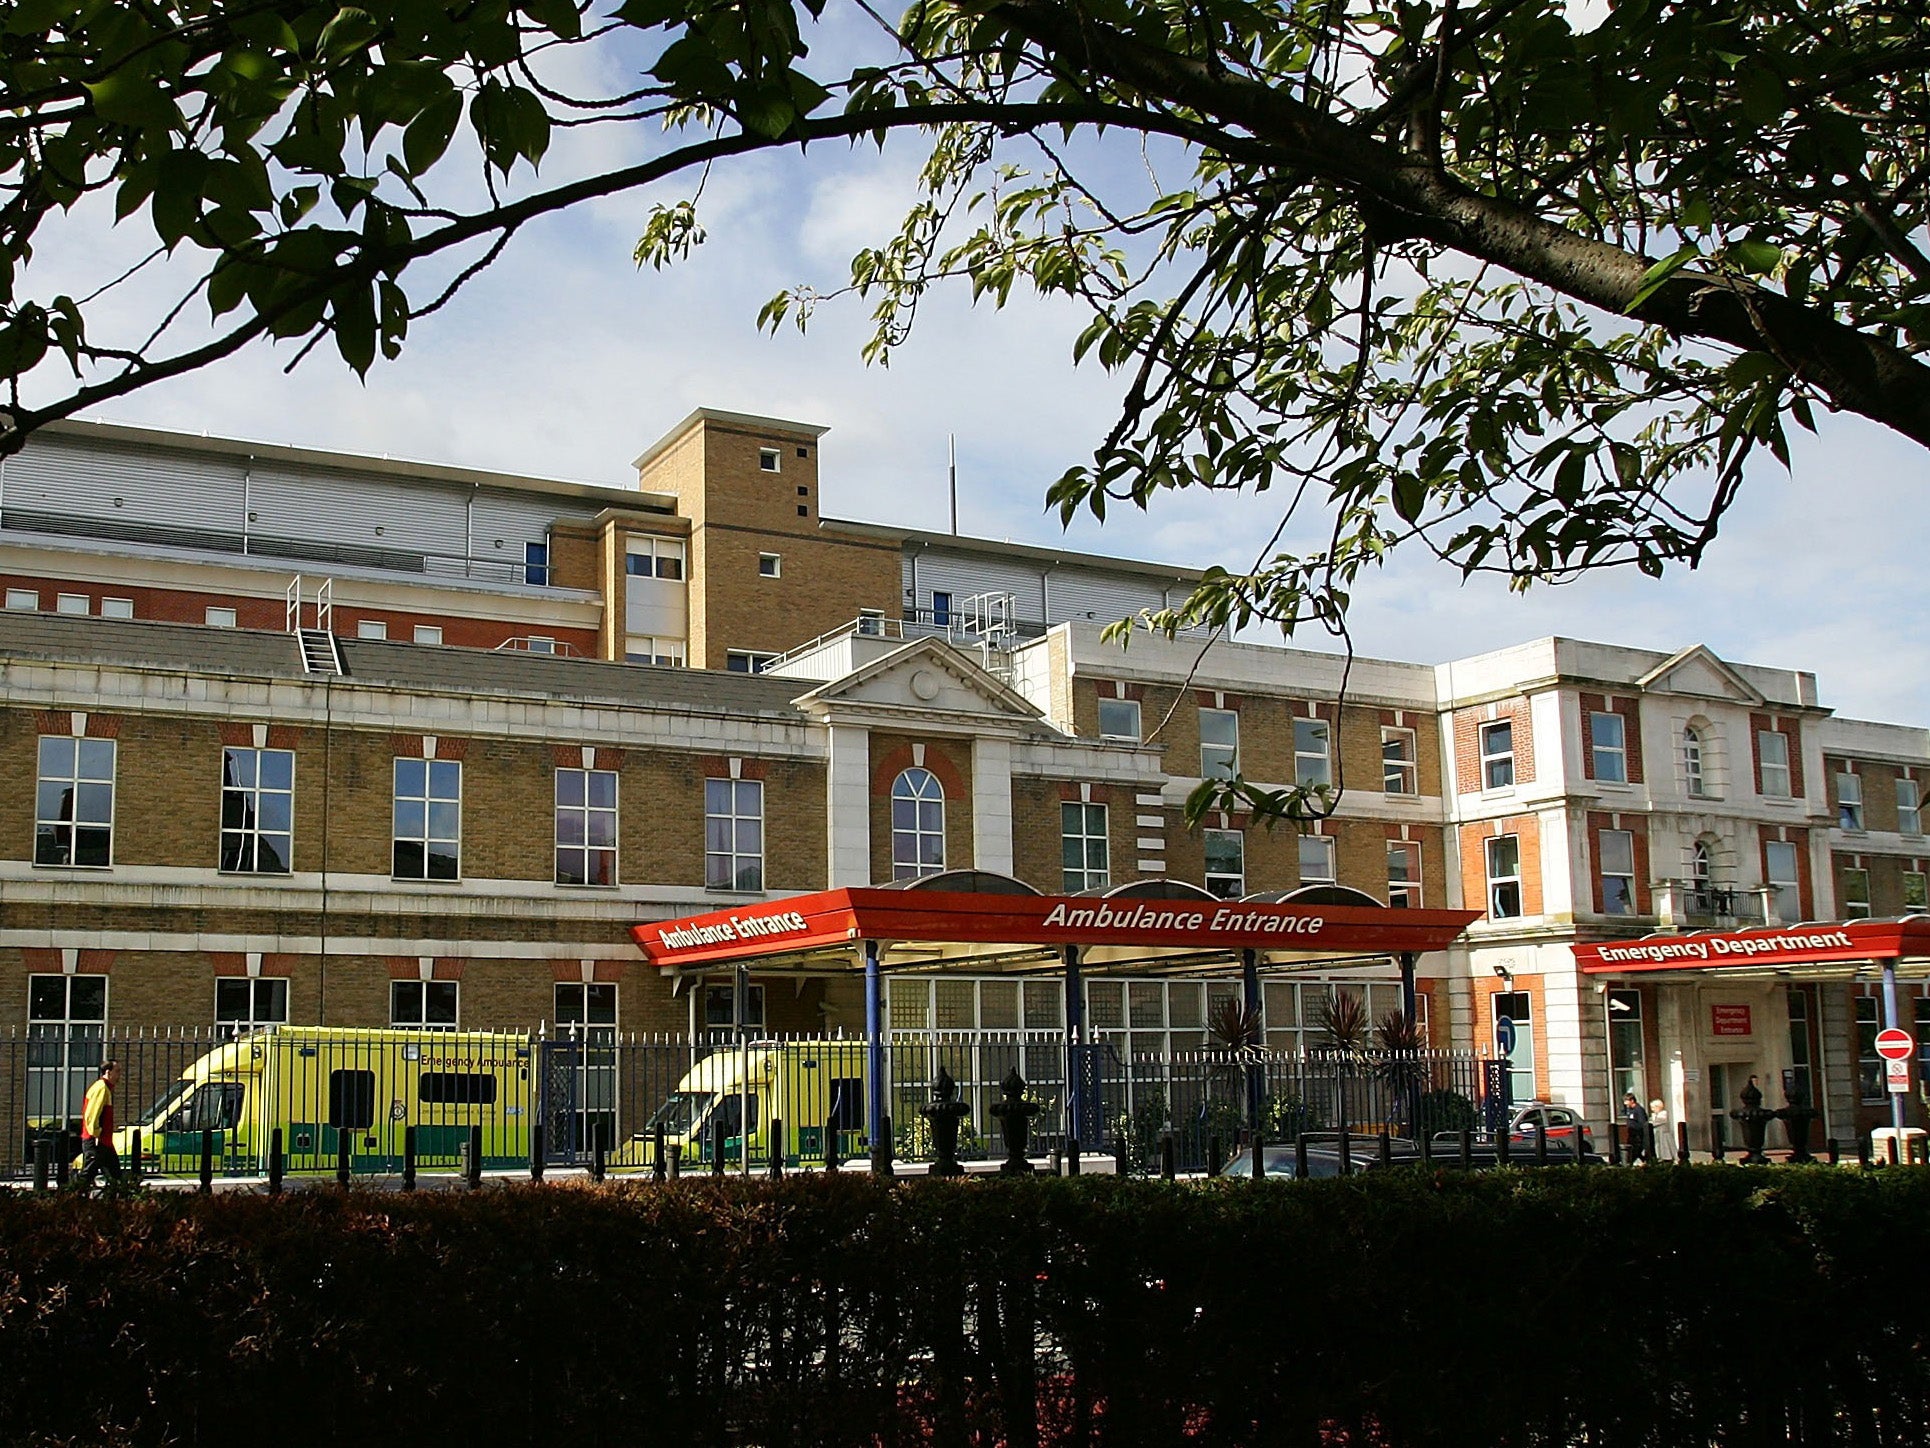 King's College Hospital has closed its new critical care unit after a fire inspection